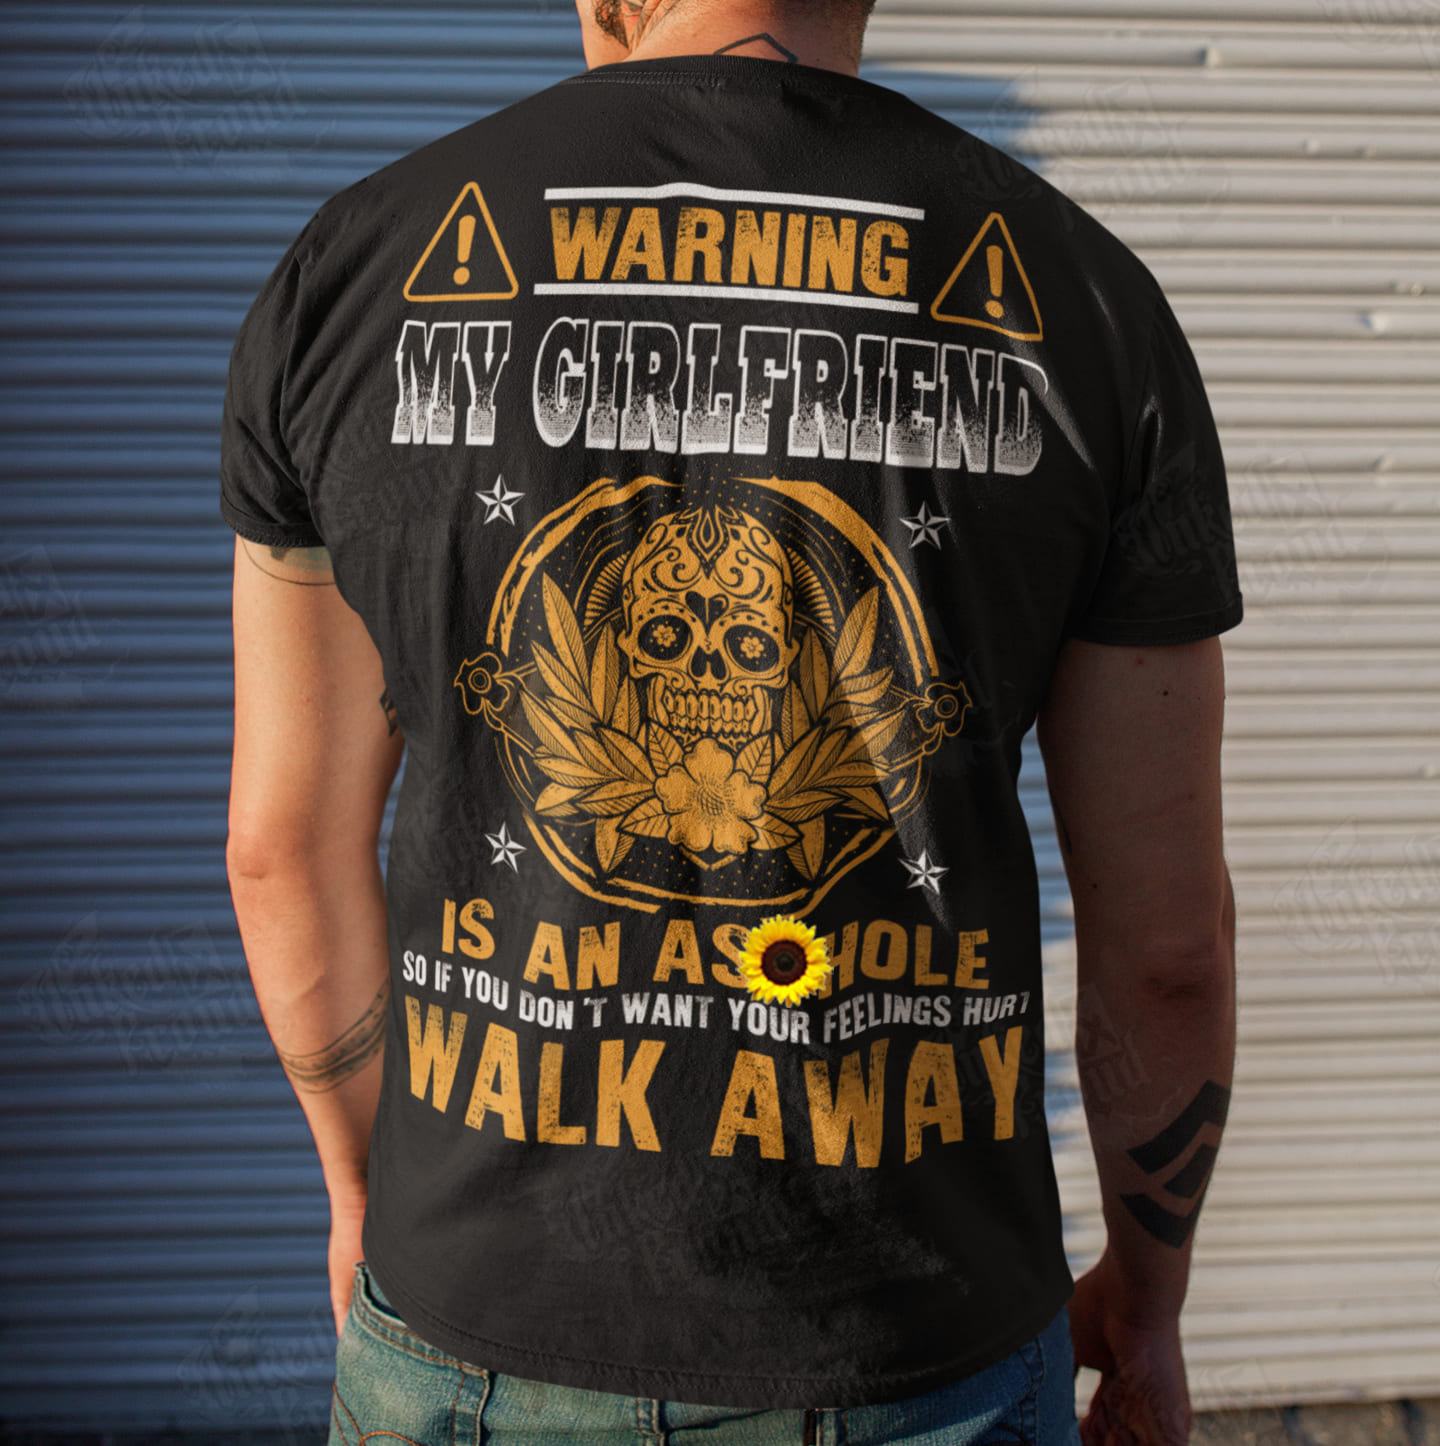 My girlfriend is an asshole so if you don't want your feelings hurts walk away - Gift for girlfriend, family T-shirt